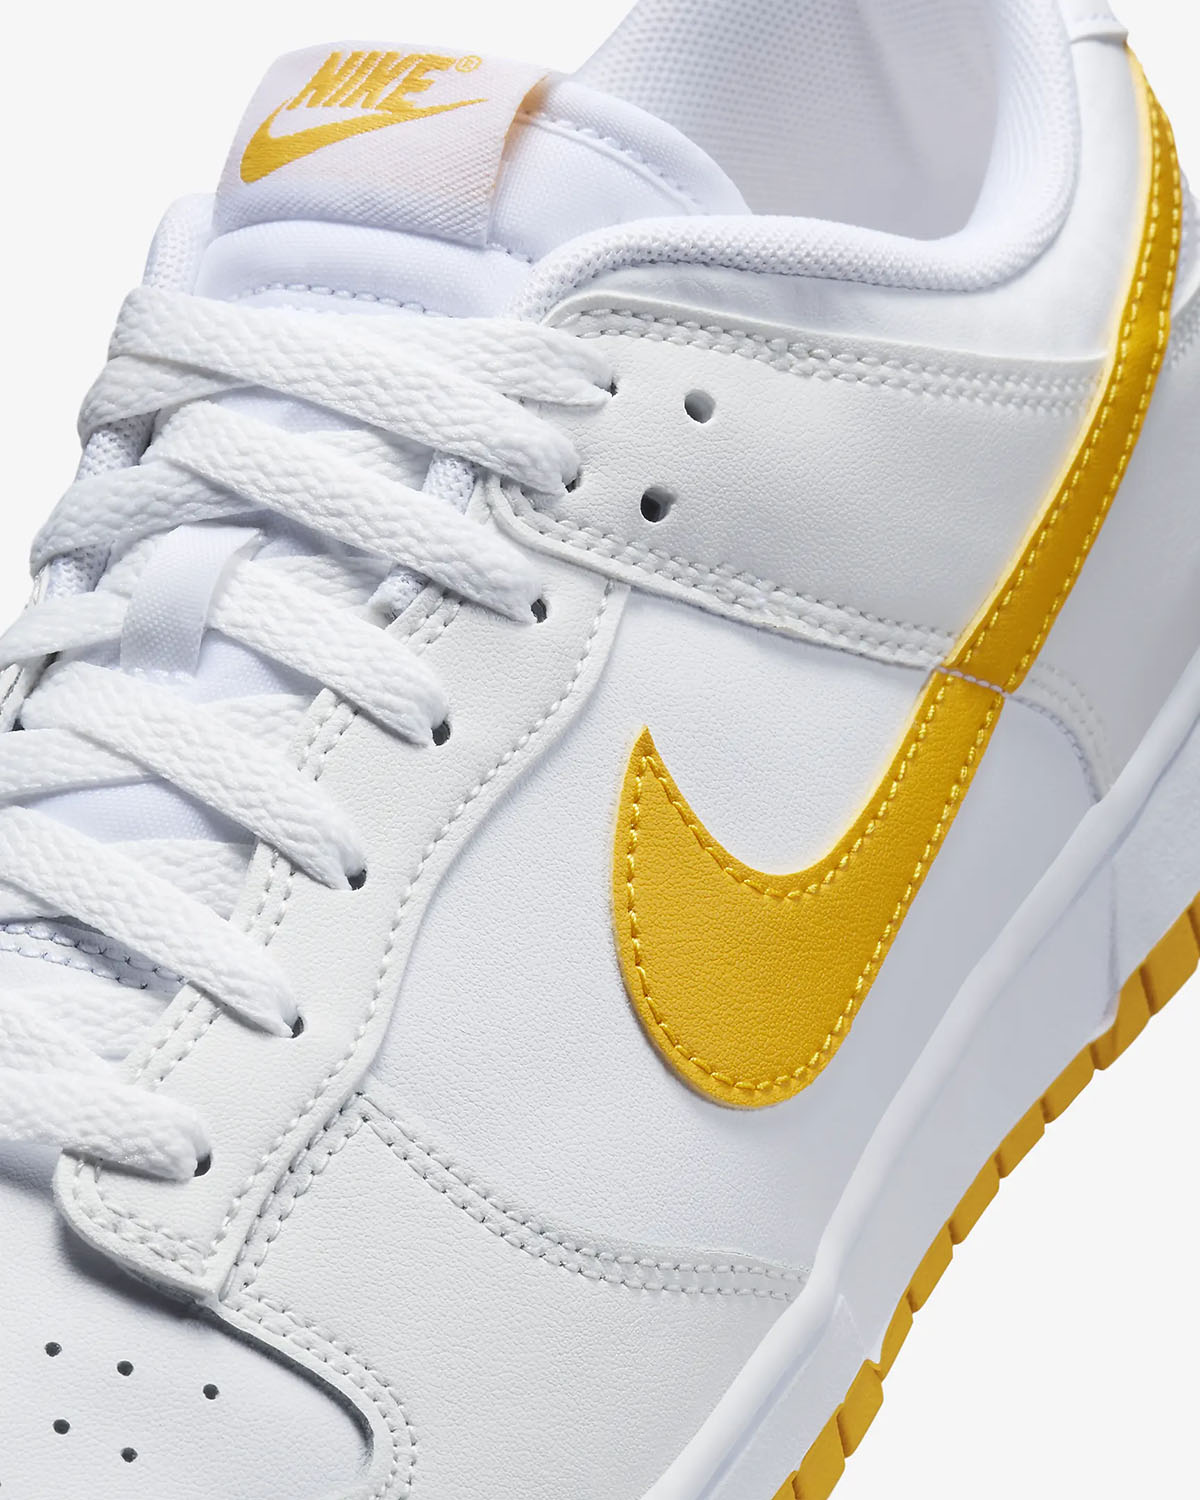 Following a first look at Nike's newest Blazer Low in two upcoming White University Gold 7